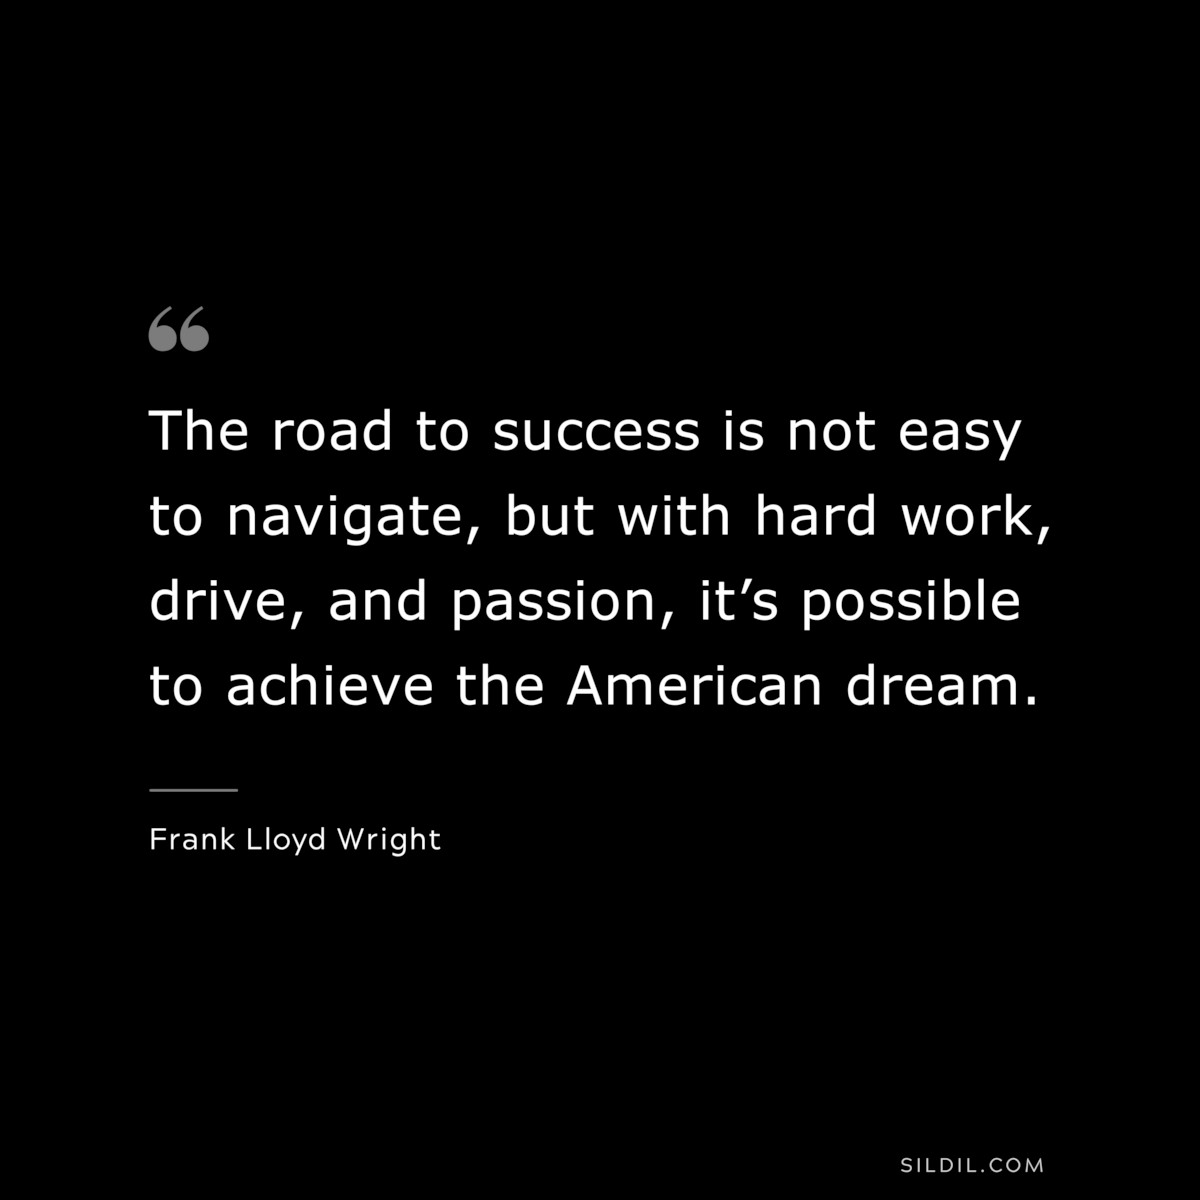 The road to success is not easy to navigate, but with hard work, drive, and passion, it’s possible to achieve the American dream. ― Tommy Hilfiger